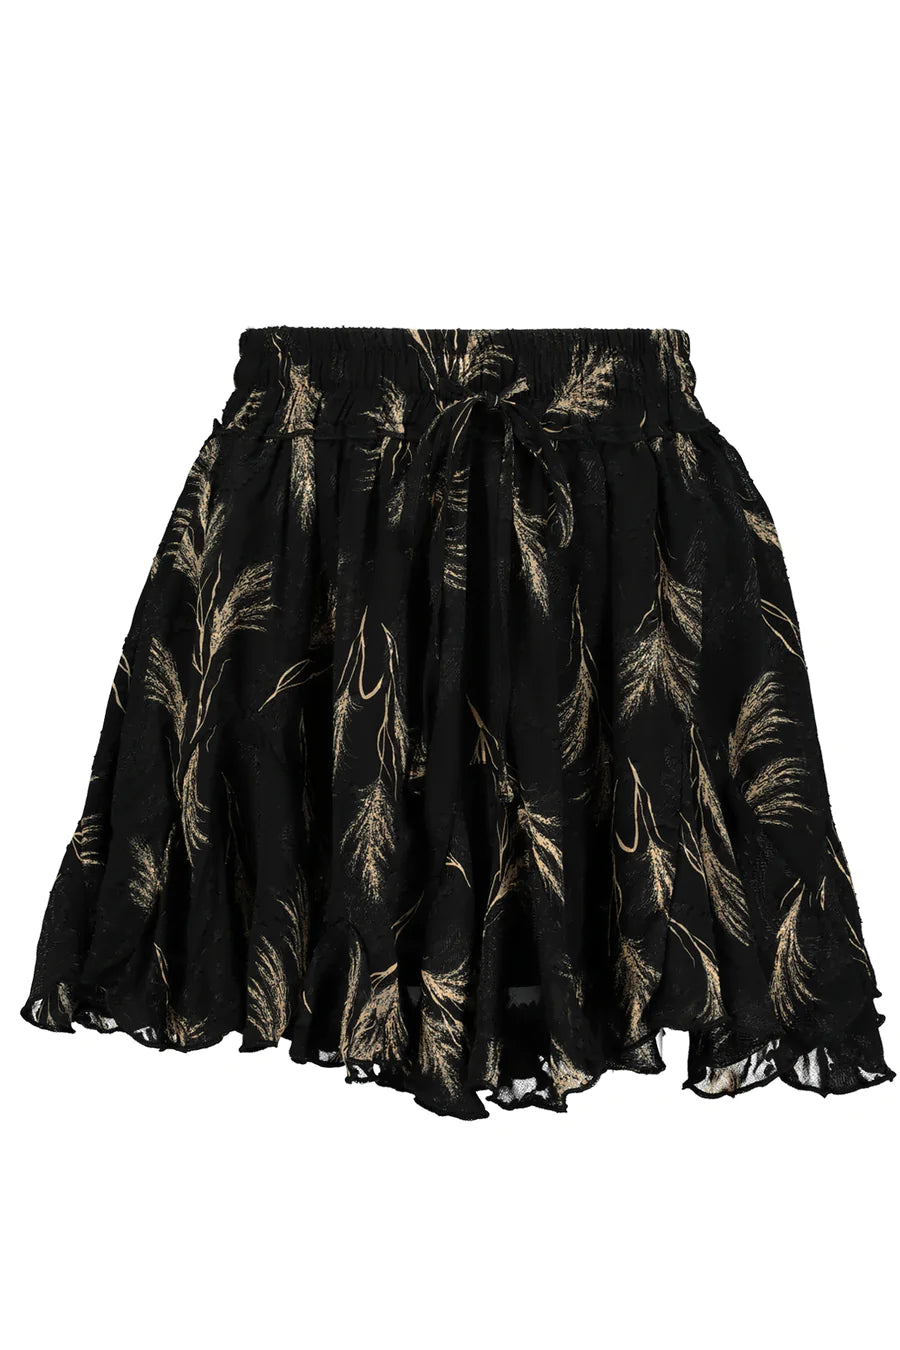 Wisteria After Hours Mini Skirt